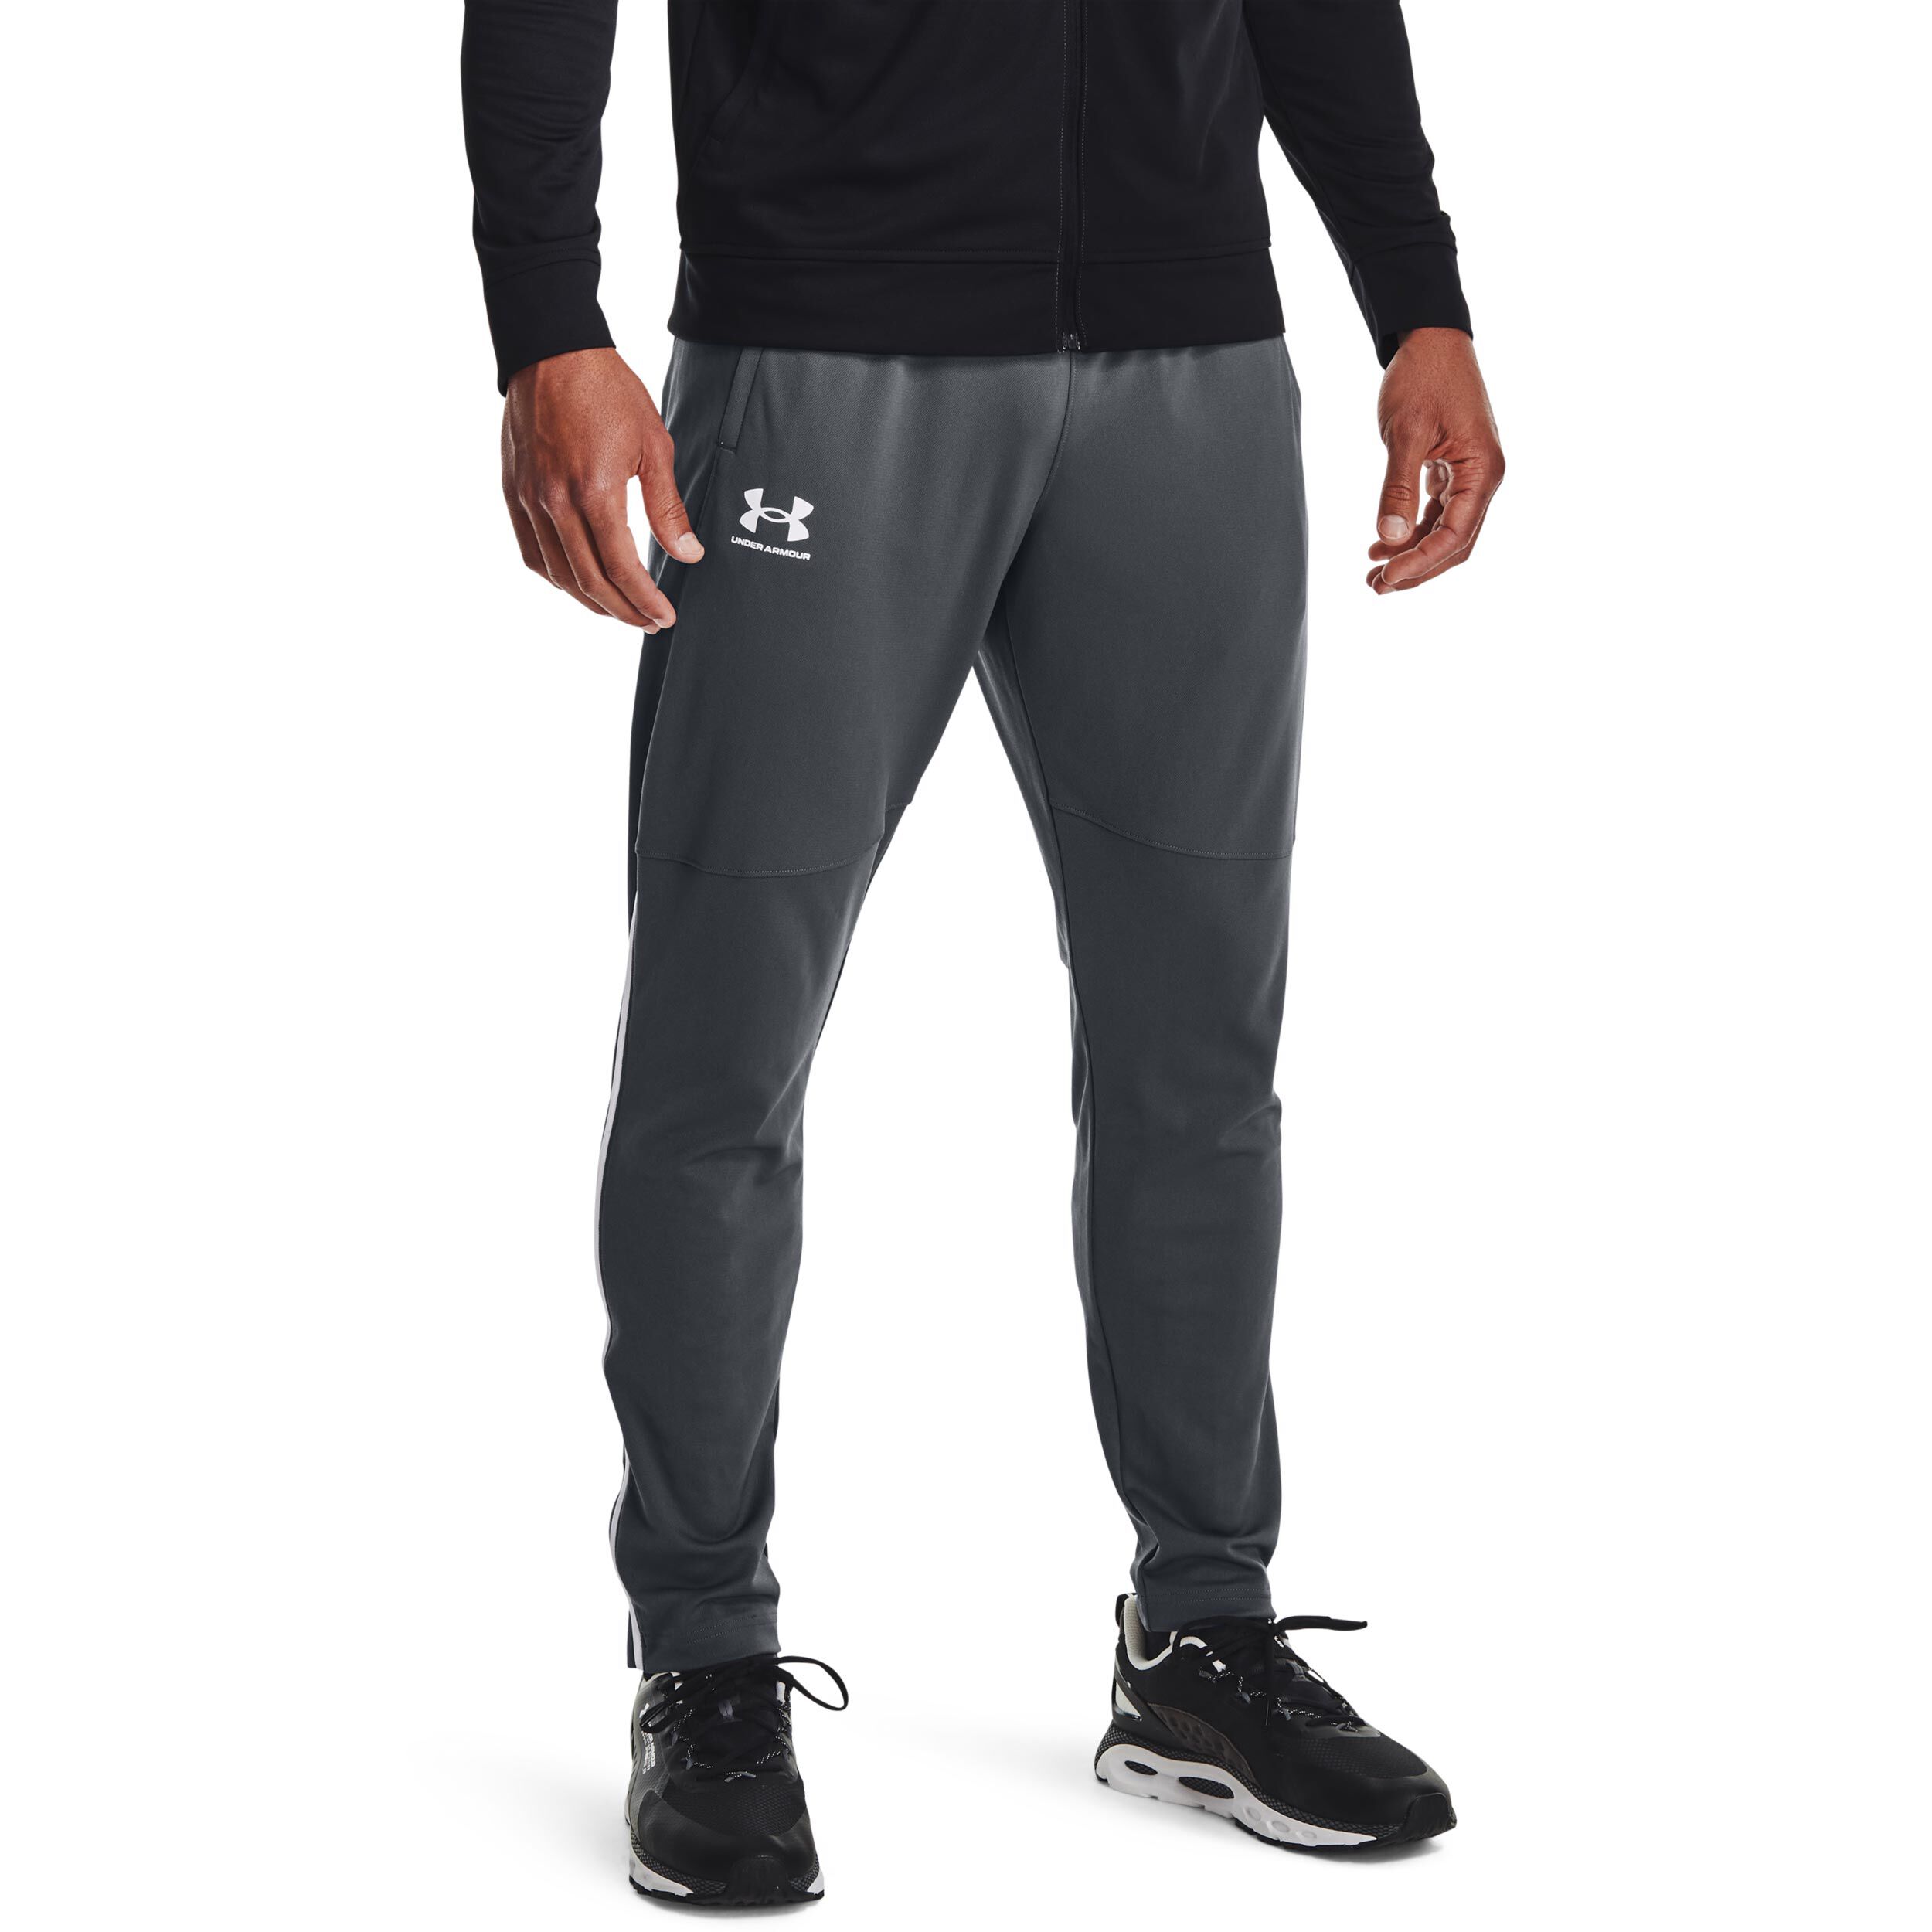 Under Armour Training pique track pants in grey | ASOS